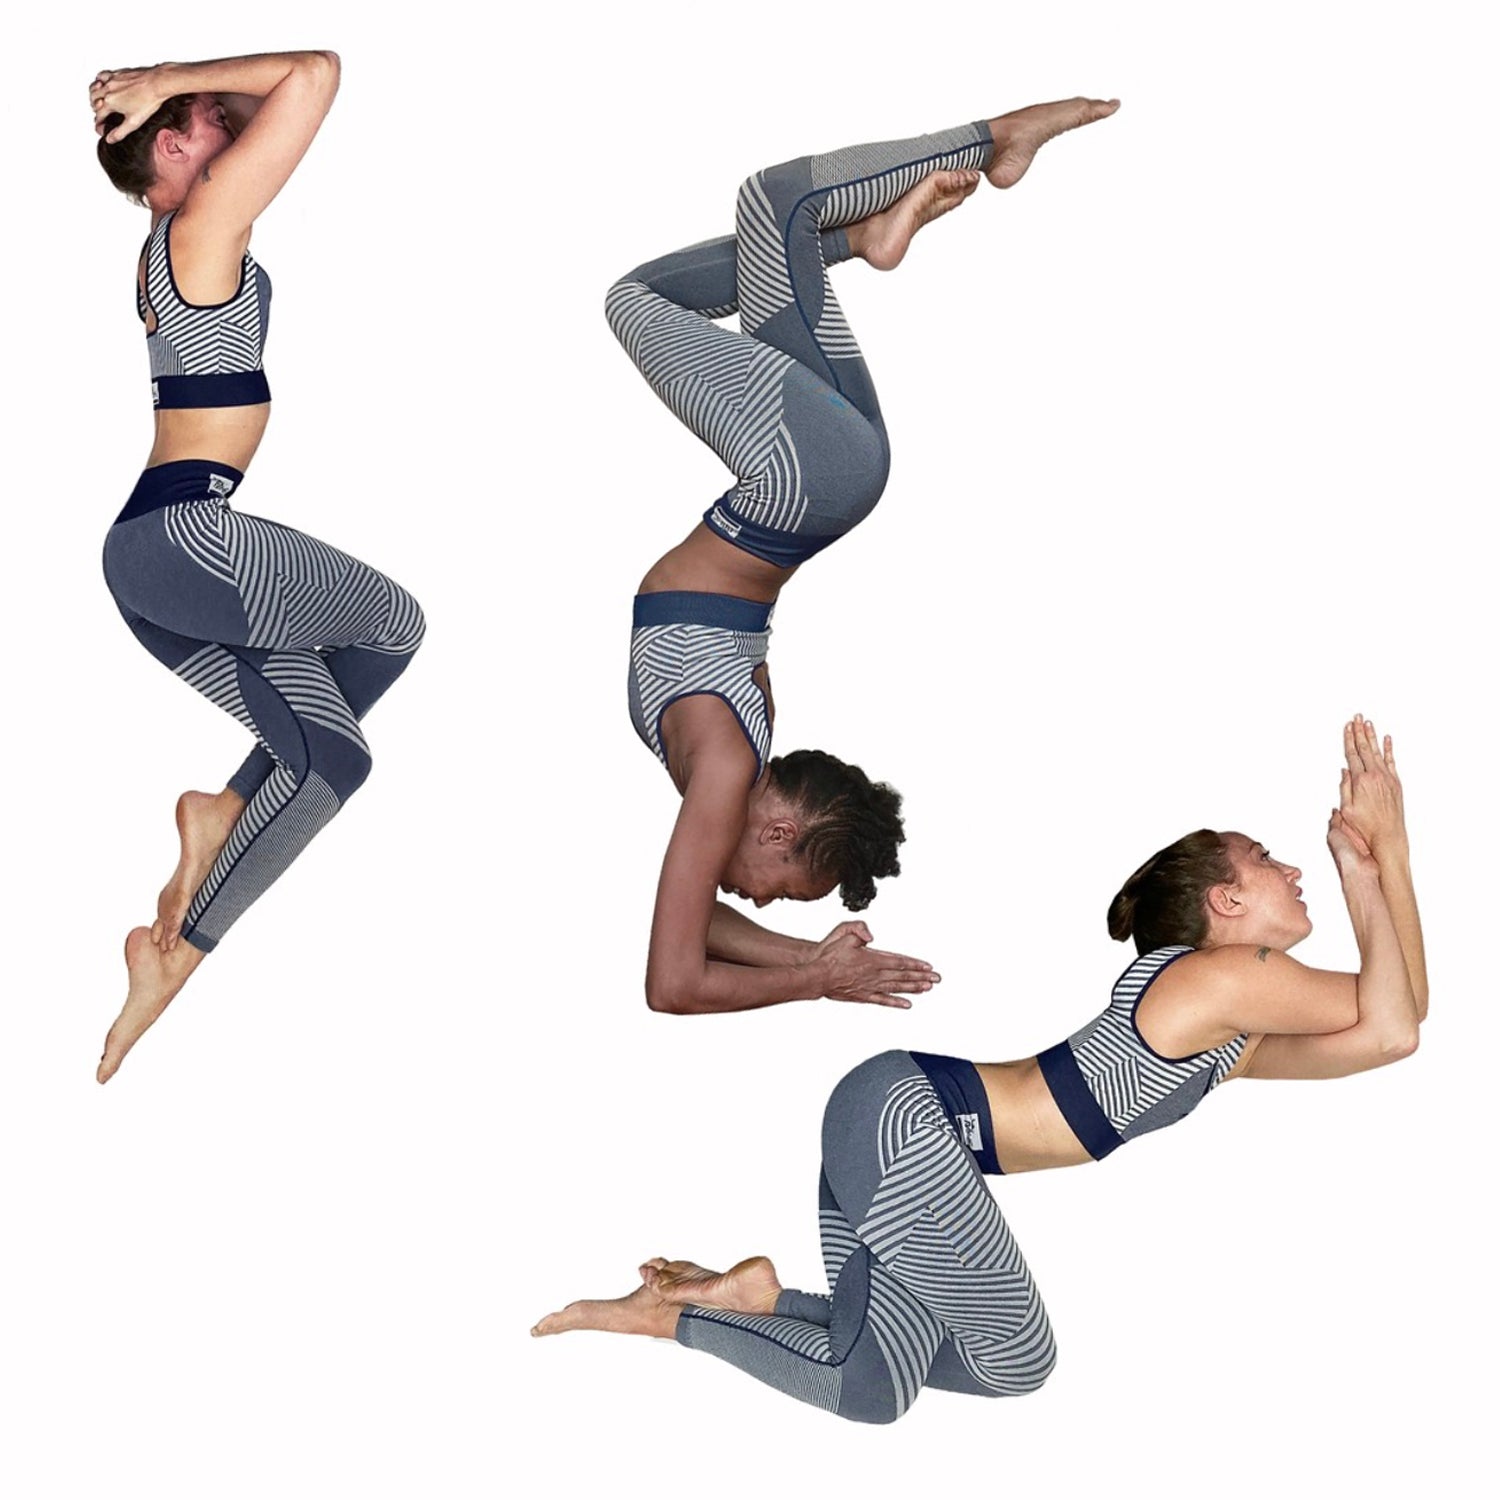 Mastering the Hollowback Pose: An Advanced Guide